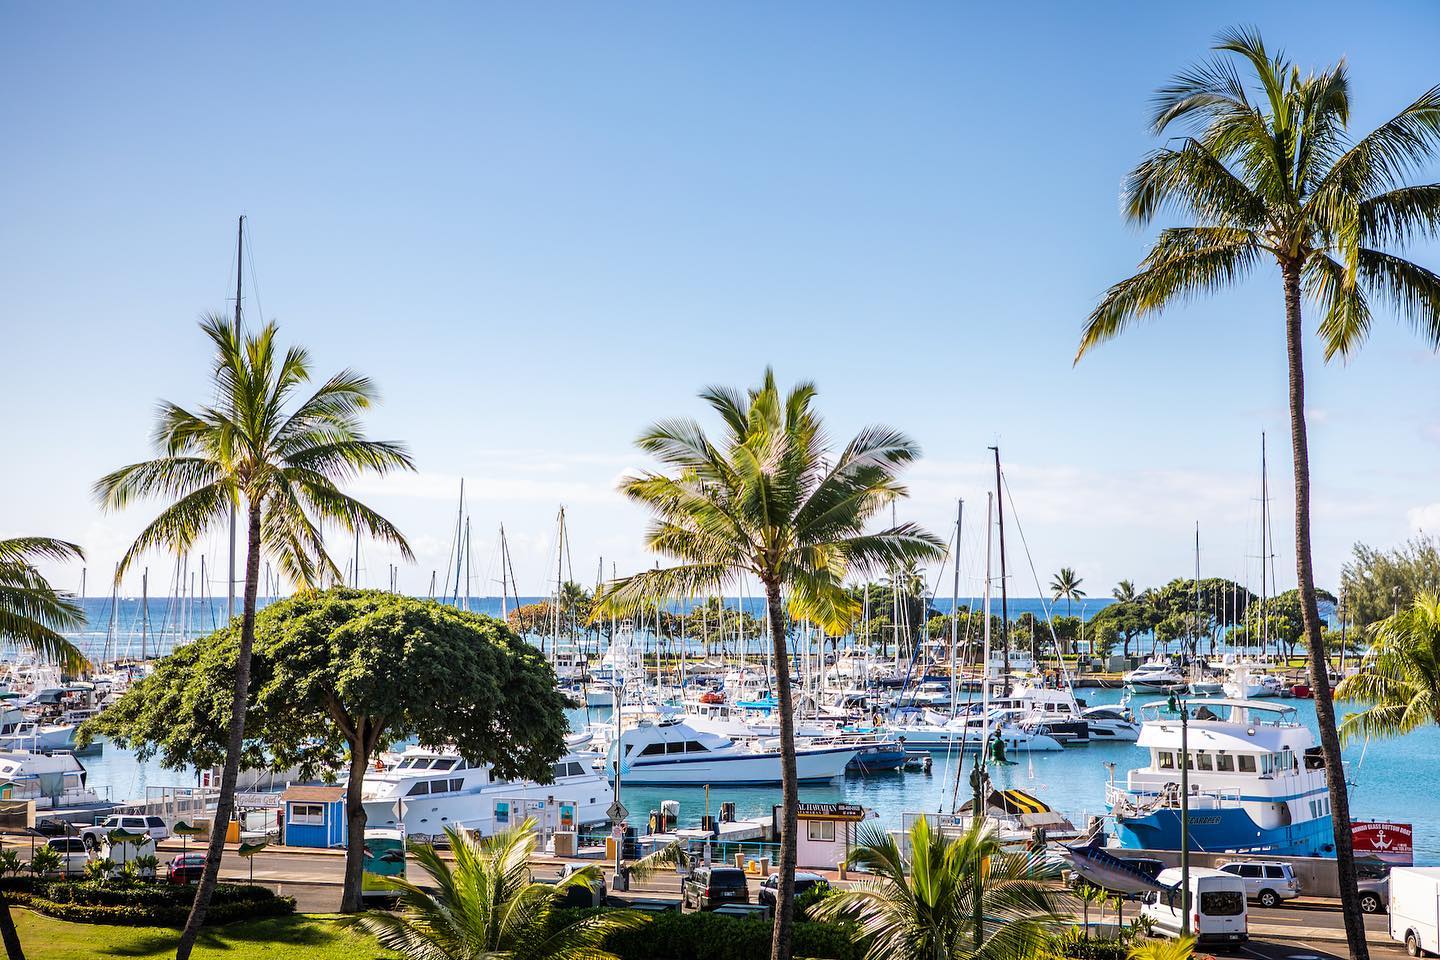 The 30-acre Kewalo Harbor is an oceanfront destination and urban fishing village that houses a mix of personal, commercial and charter vessels. Offering adventures in sailing, snorkeling, scuba diving, fishing and more, the harbor truly connects Ward Village from mauka to makai.